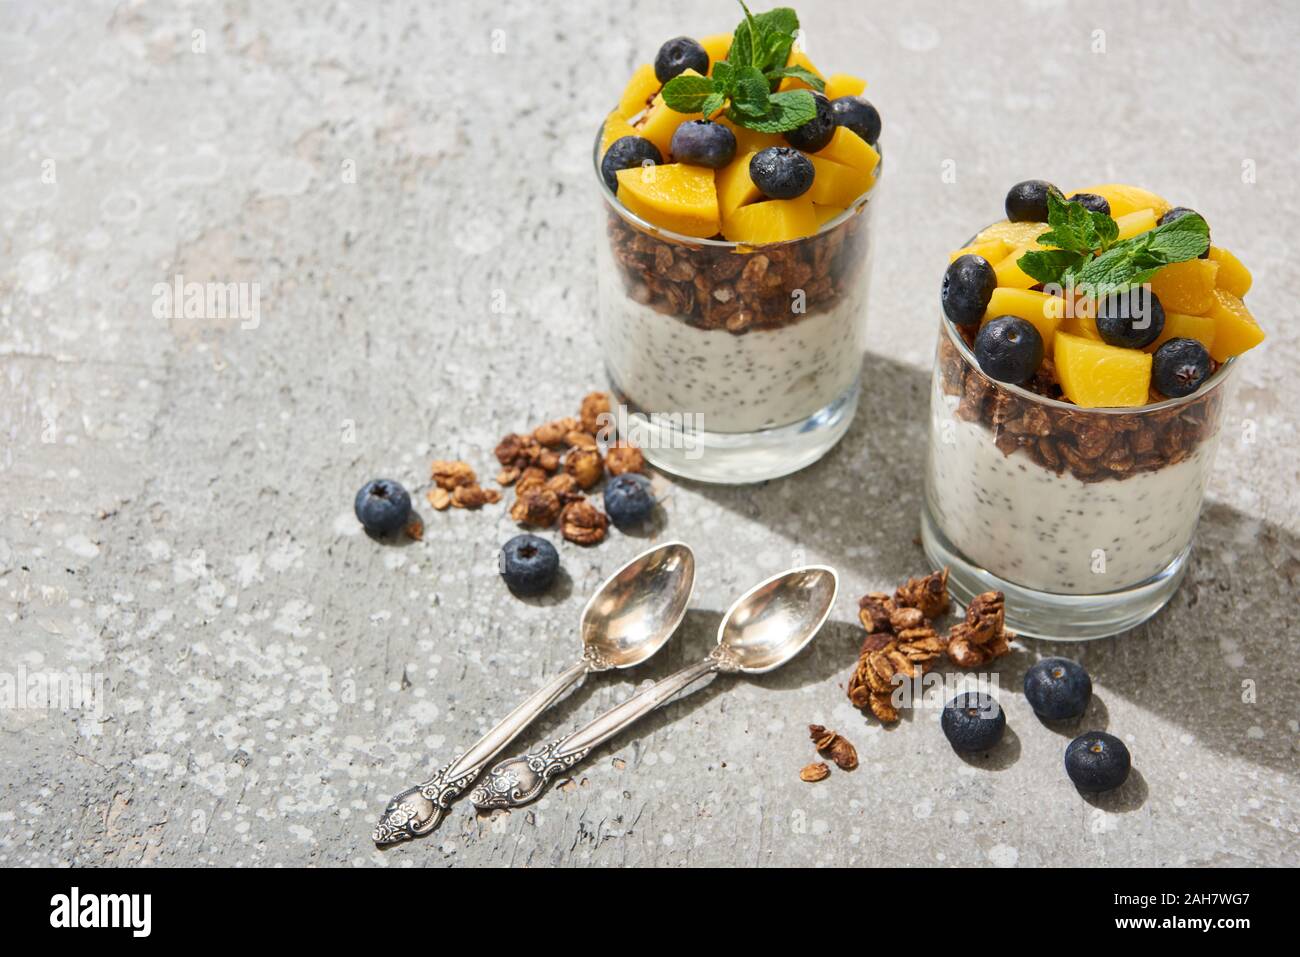 tasty granola with canned peach, blueberries and yogurt with chia seeds on grey concrete surface with spoons Stock Photo